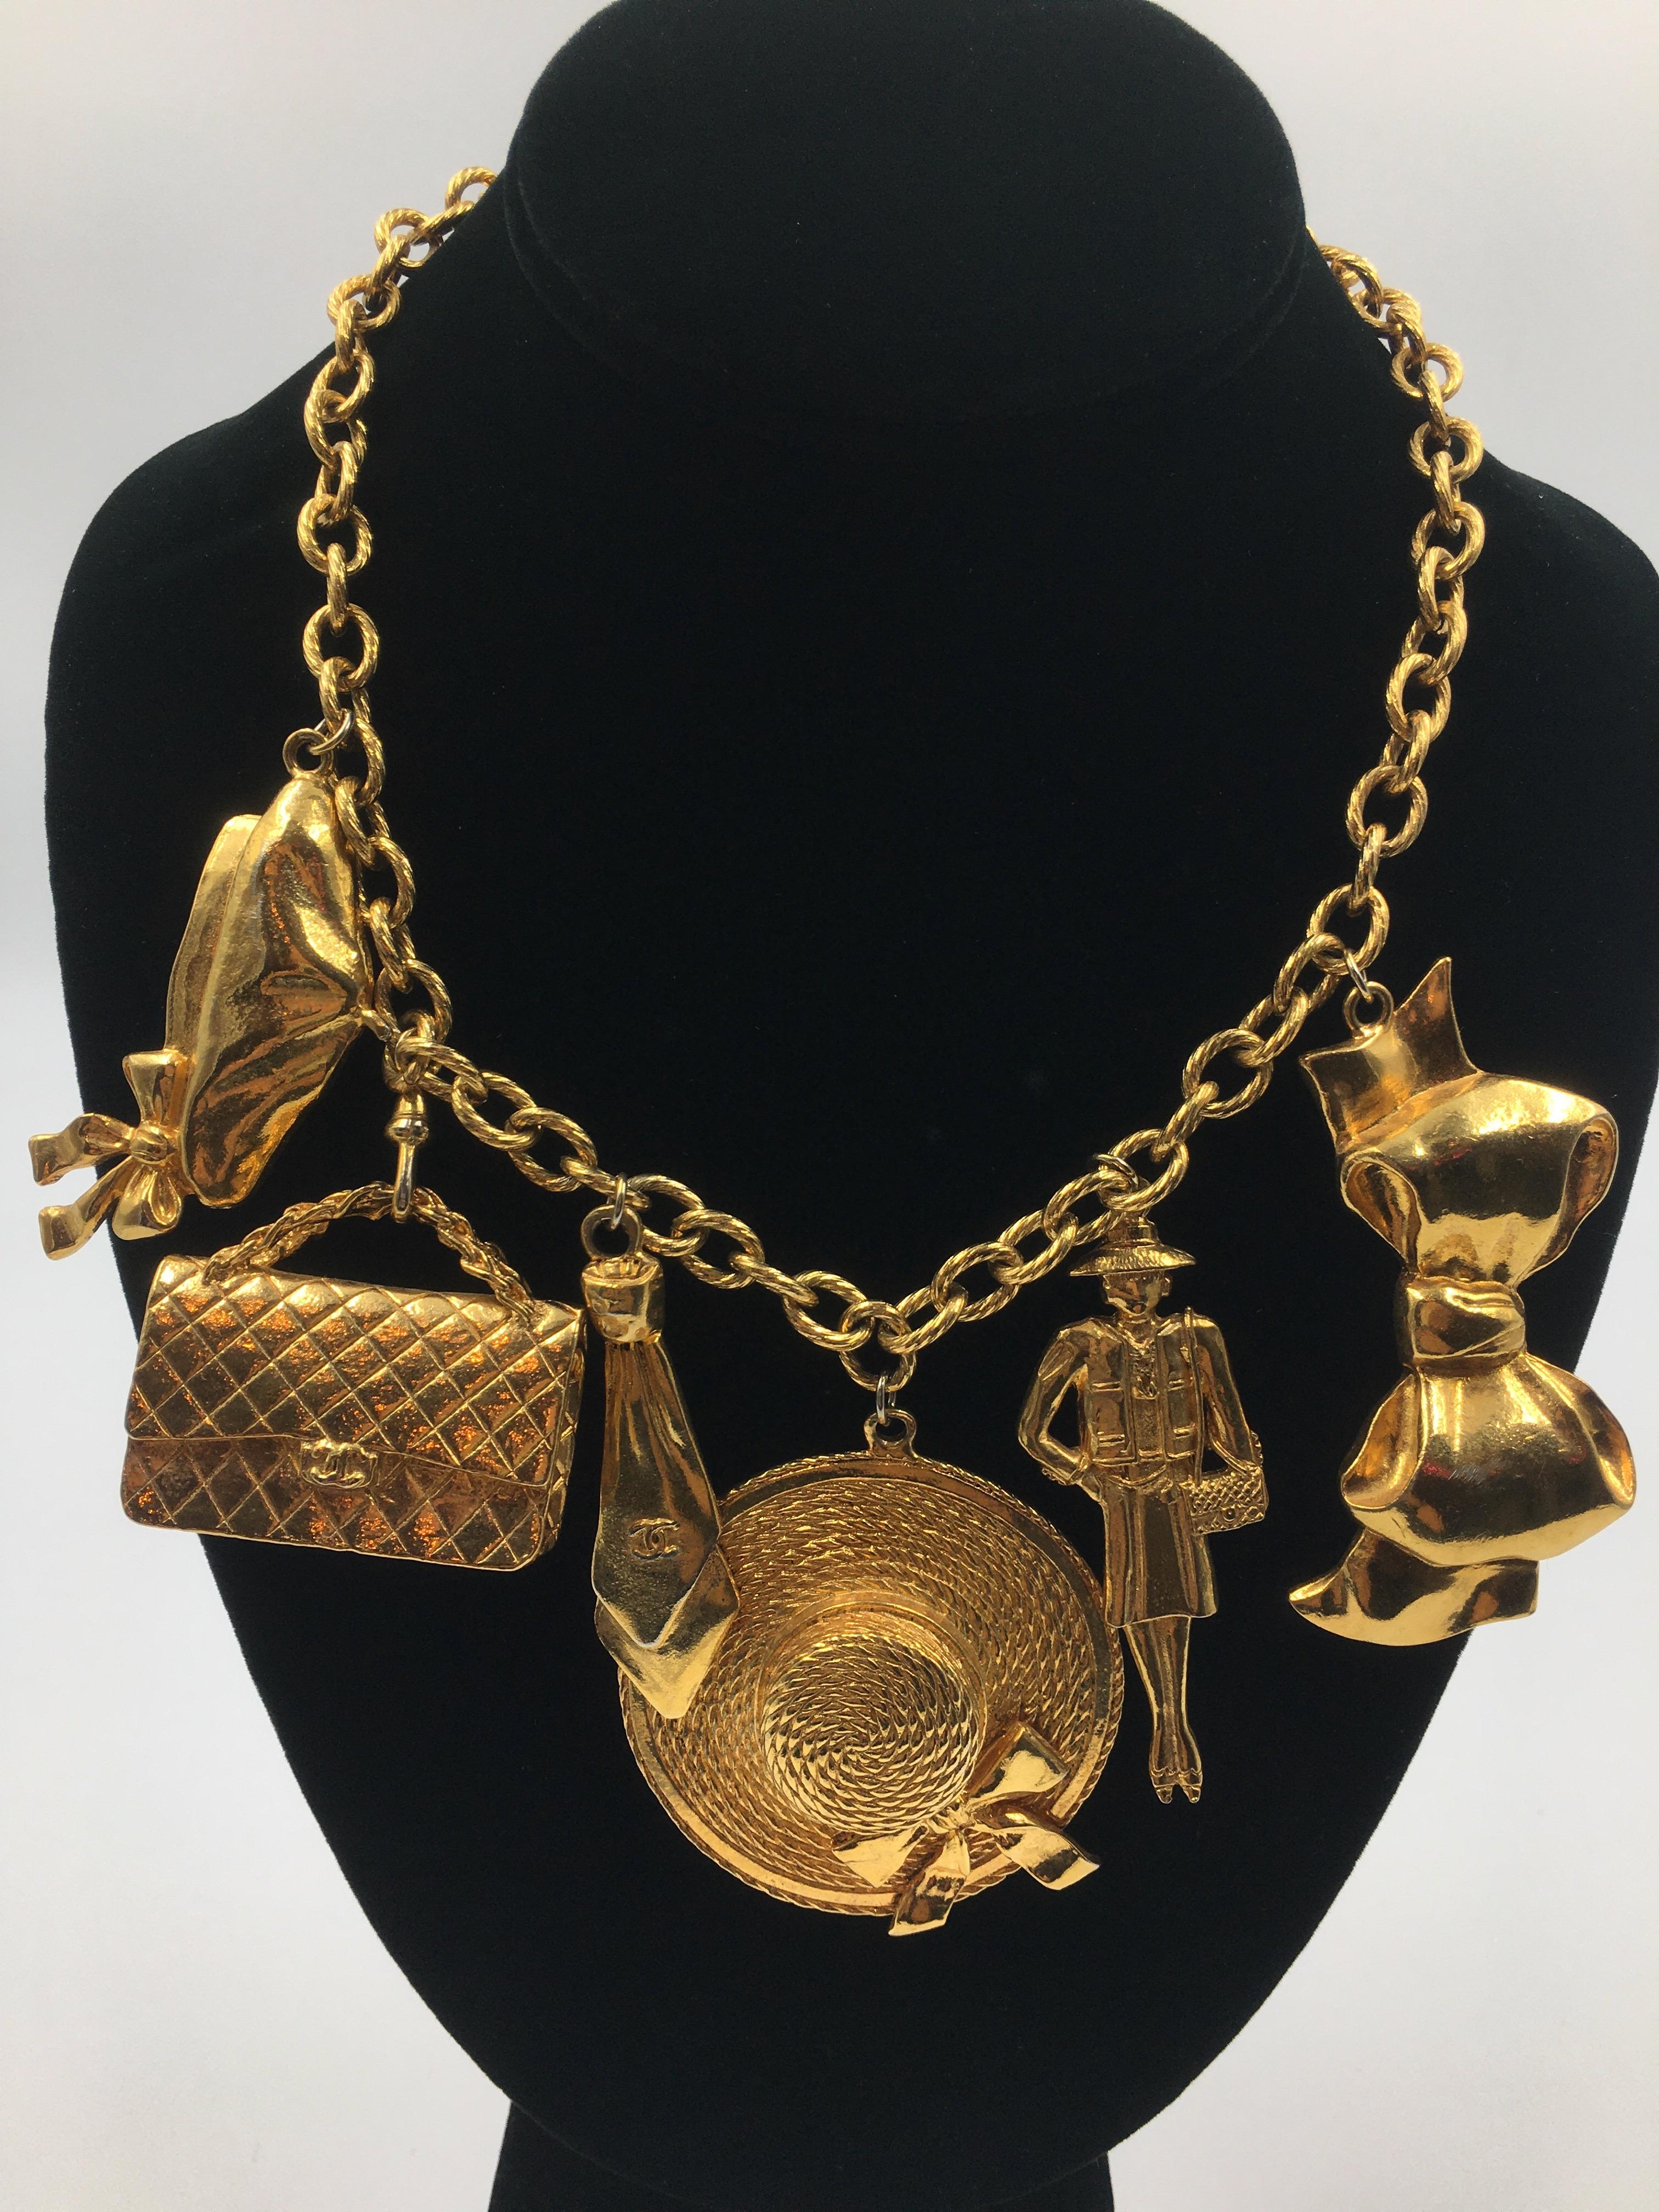 Chanel 6 Charm gold tone necklace with the most iconic symbols of Chanel. Charms include Coco Chanel barrette, Classic Chanel quilted bag, Coco Chanel neck tie, a large brim hat with bow, Coco Chanel charm and the big Chanel bow. In good vintage